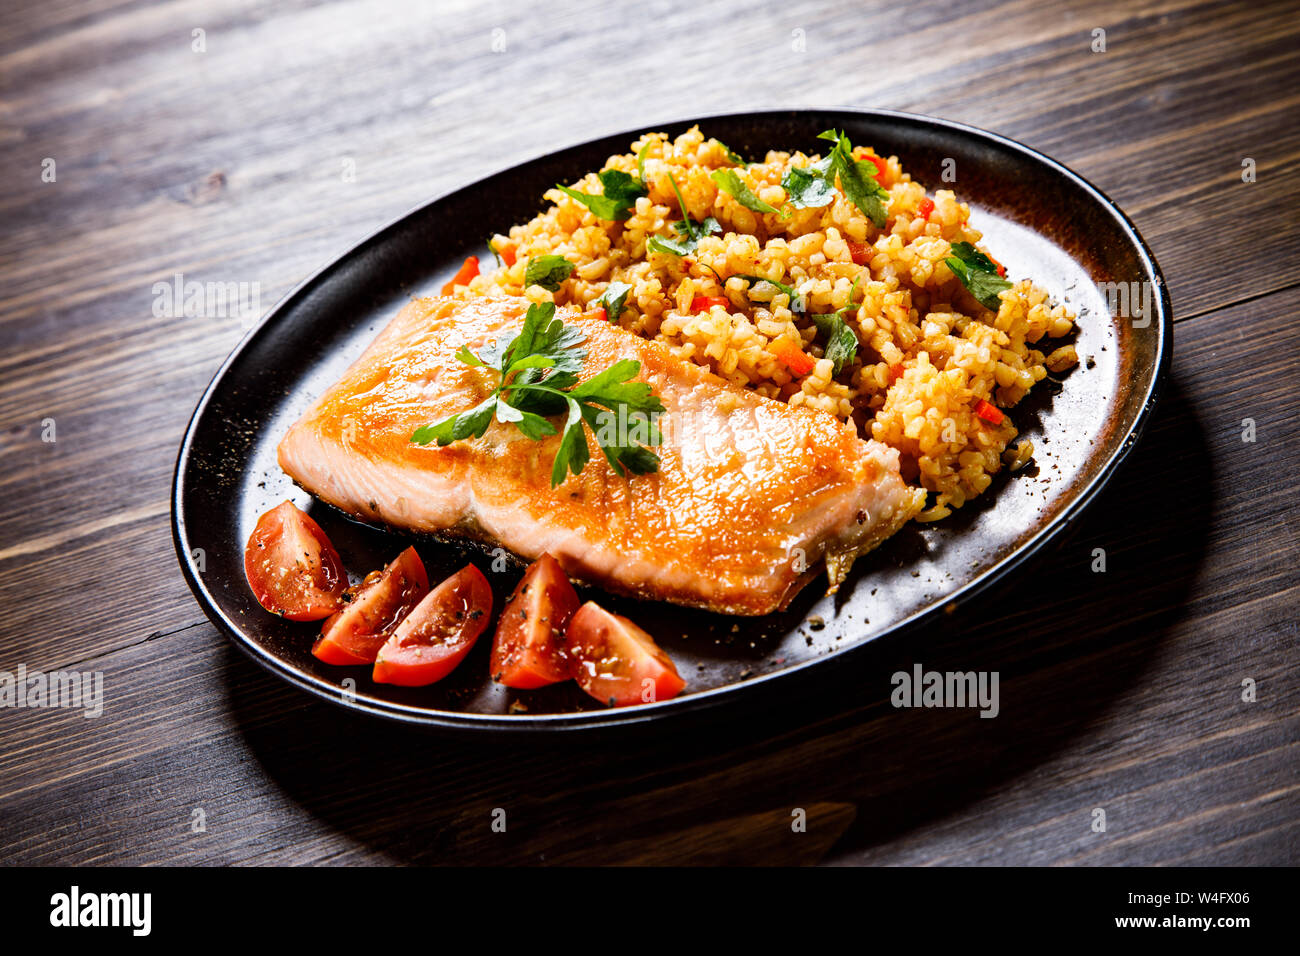 Roast salmon with groats and vegetables Stock Photo